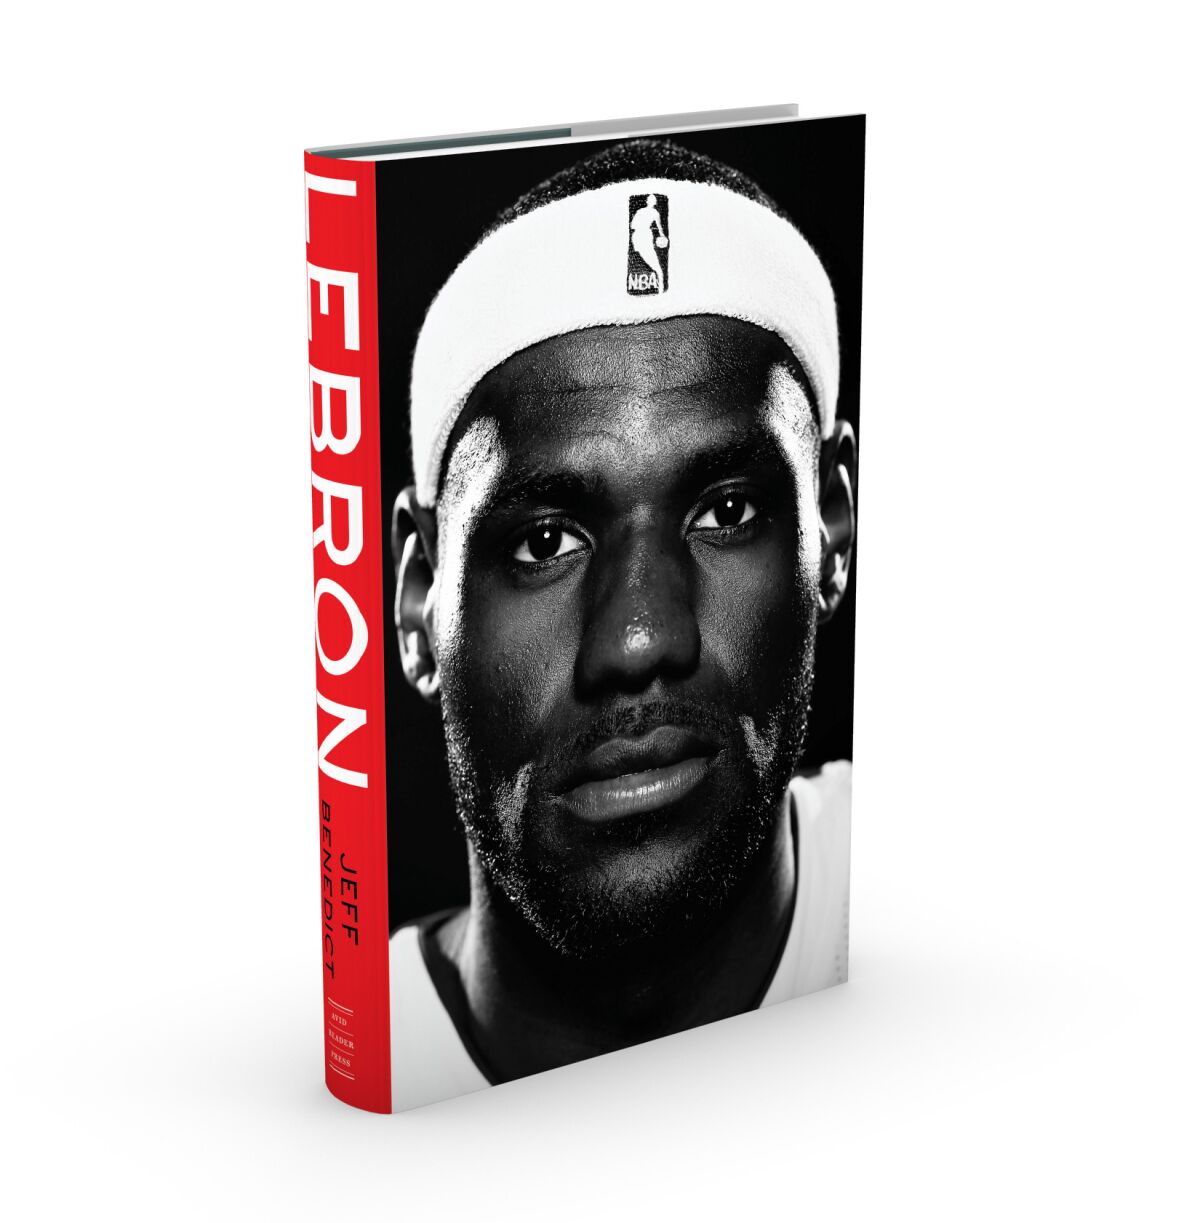 A photo of LeBron James' face is featured on the cover of the book "LeBron" by Jeff Benedict.